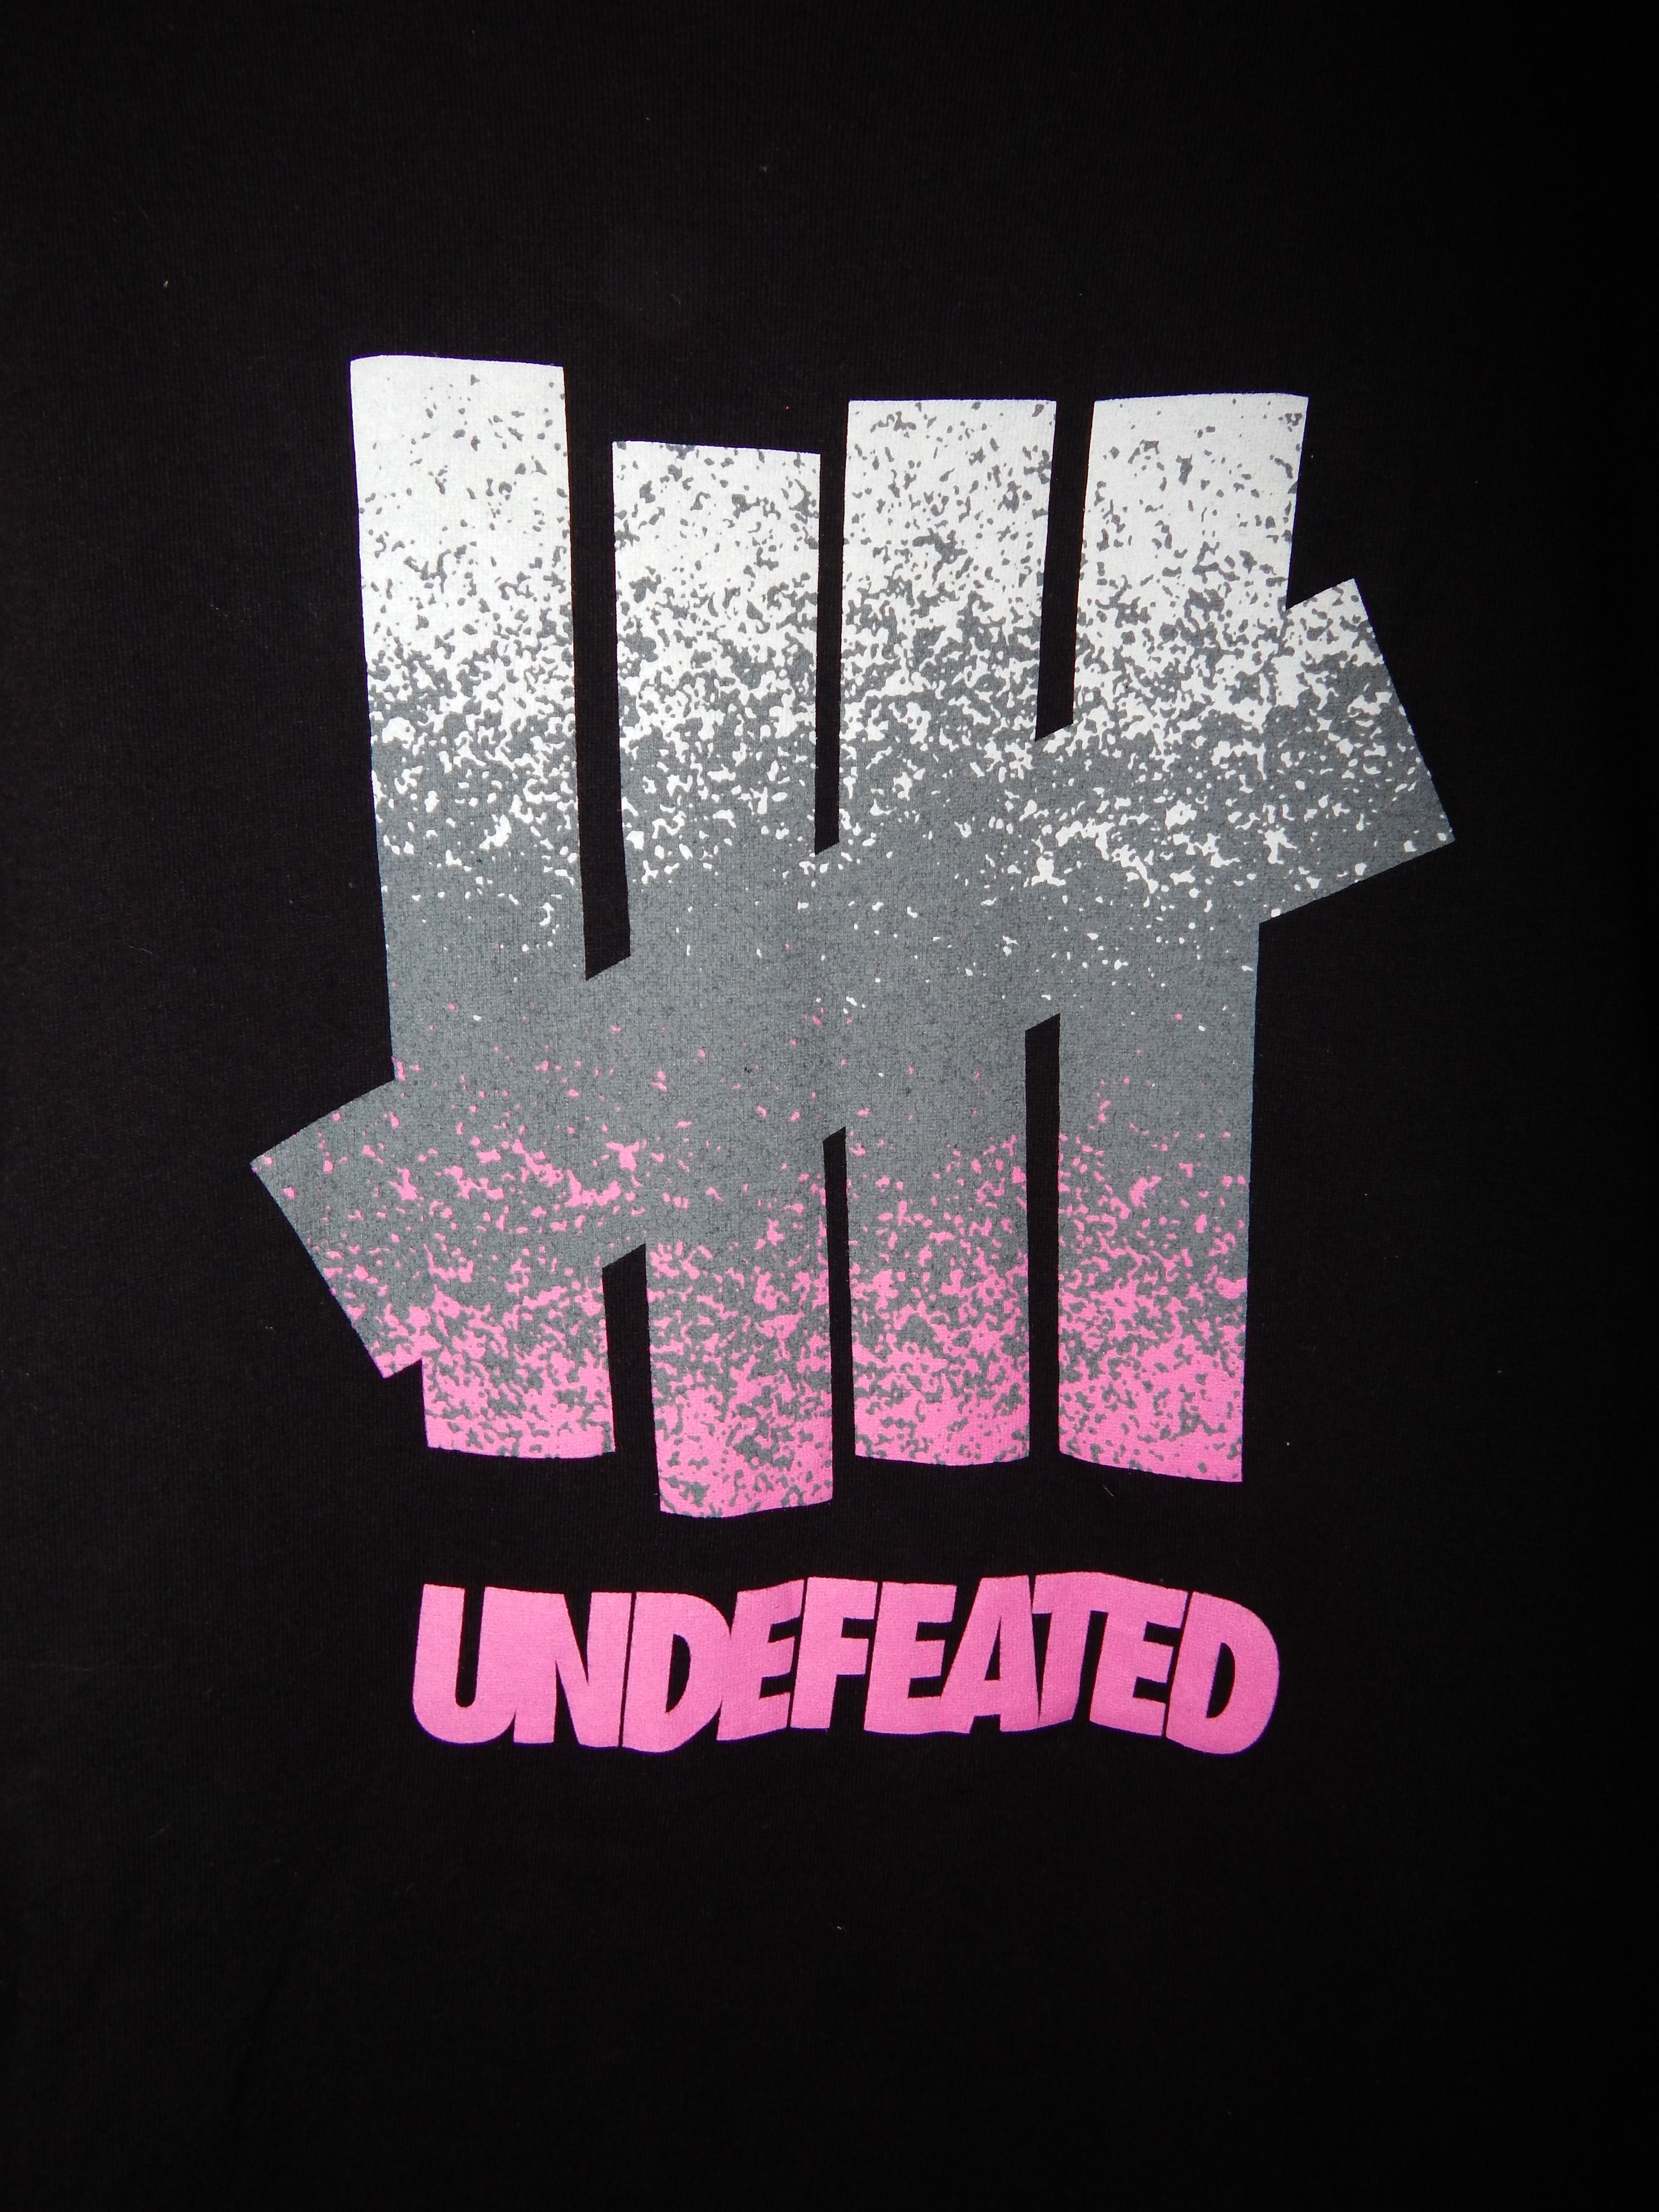 Undefeated Undefeated 5 Strikes Streetwear Big Logo T-shirt Size US XL / EU 56 / 4 - 2 Preview